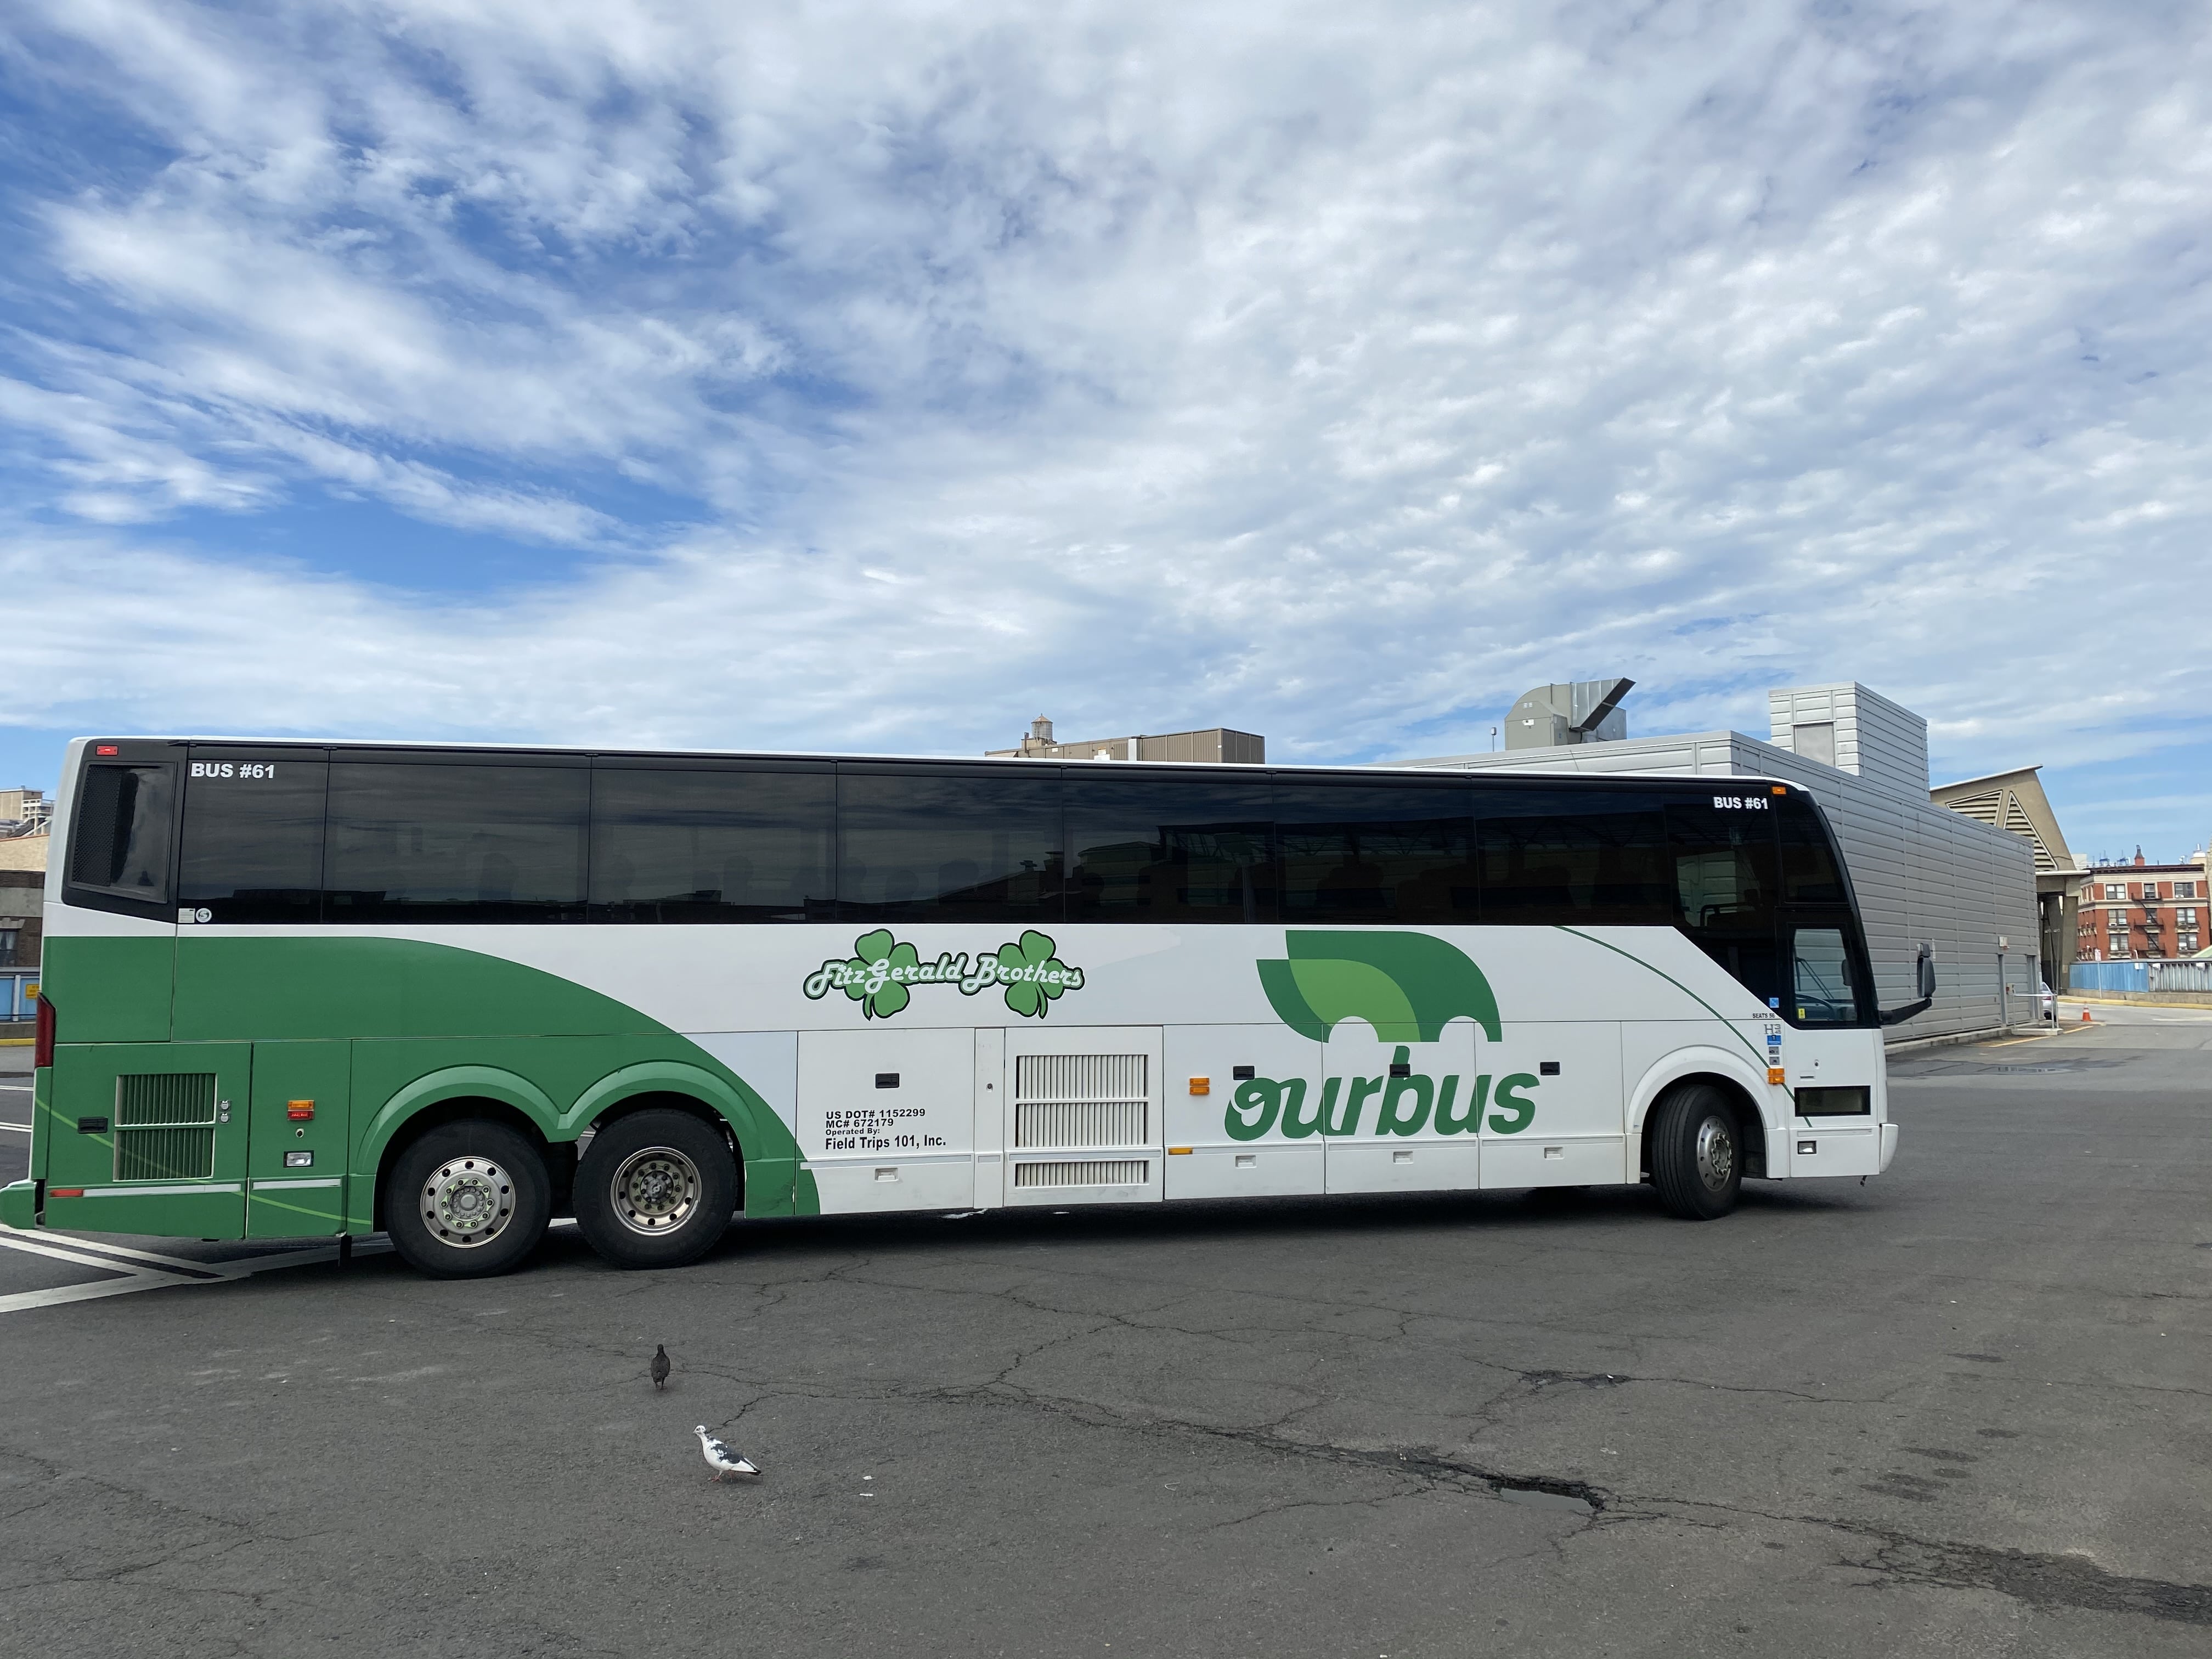 ourbus branded bus